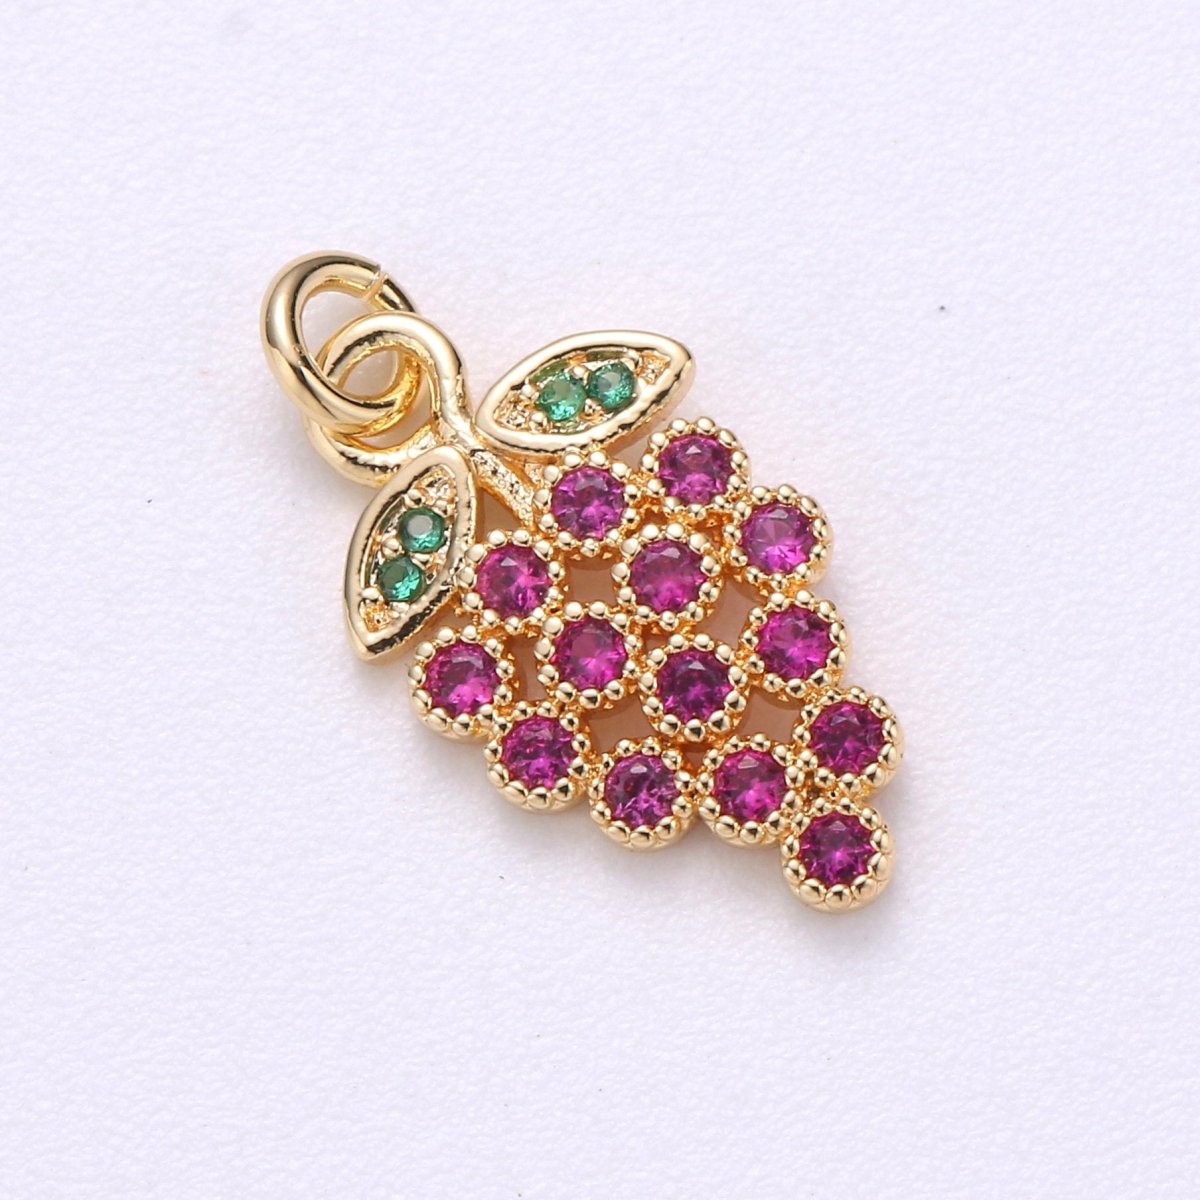 Colorful CZ Micro Pave Grape Charm, Cubic Zirconia Pave Fruit Pendant Charm, Micro Pave Fruits Charm in 18k gold filled, C-421 - DLUXCA